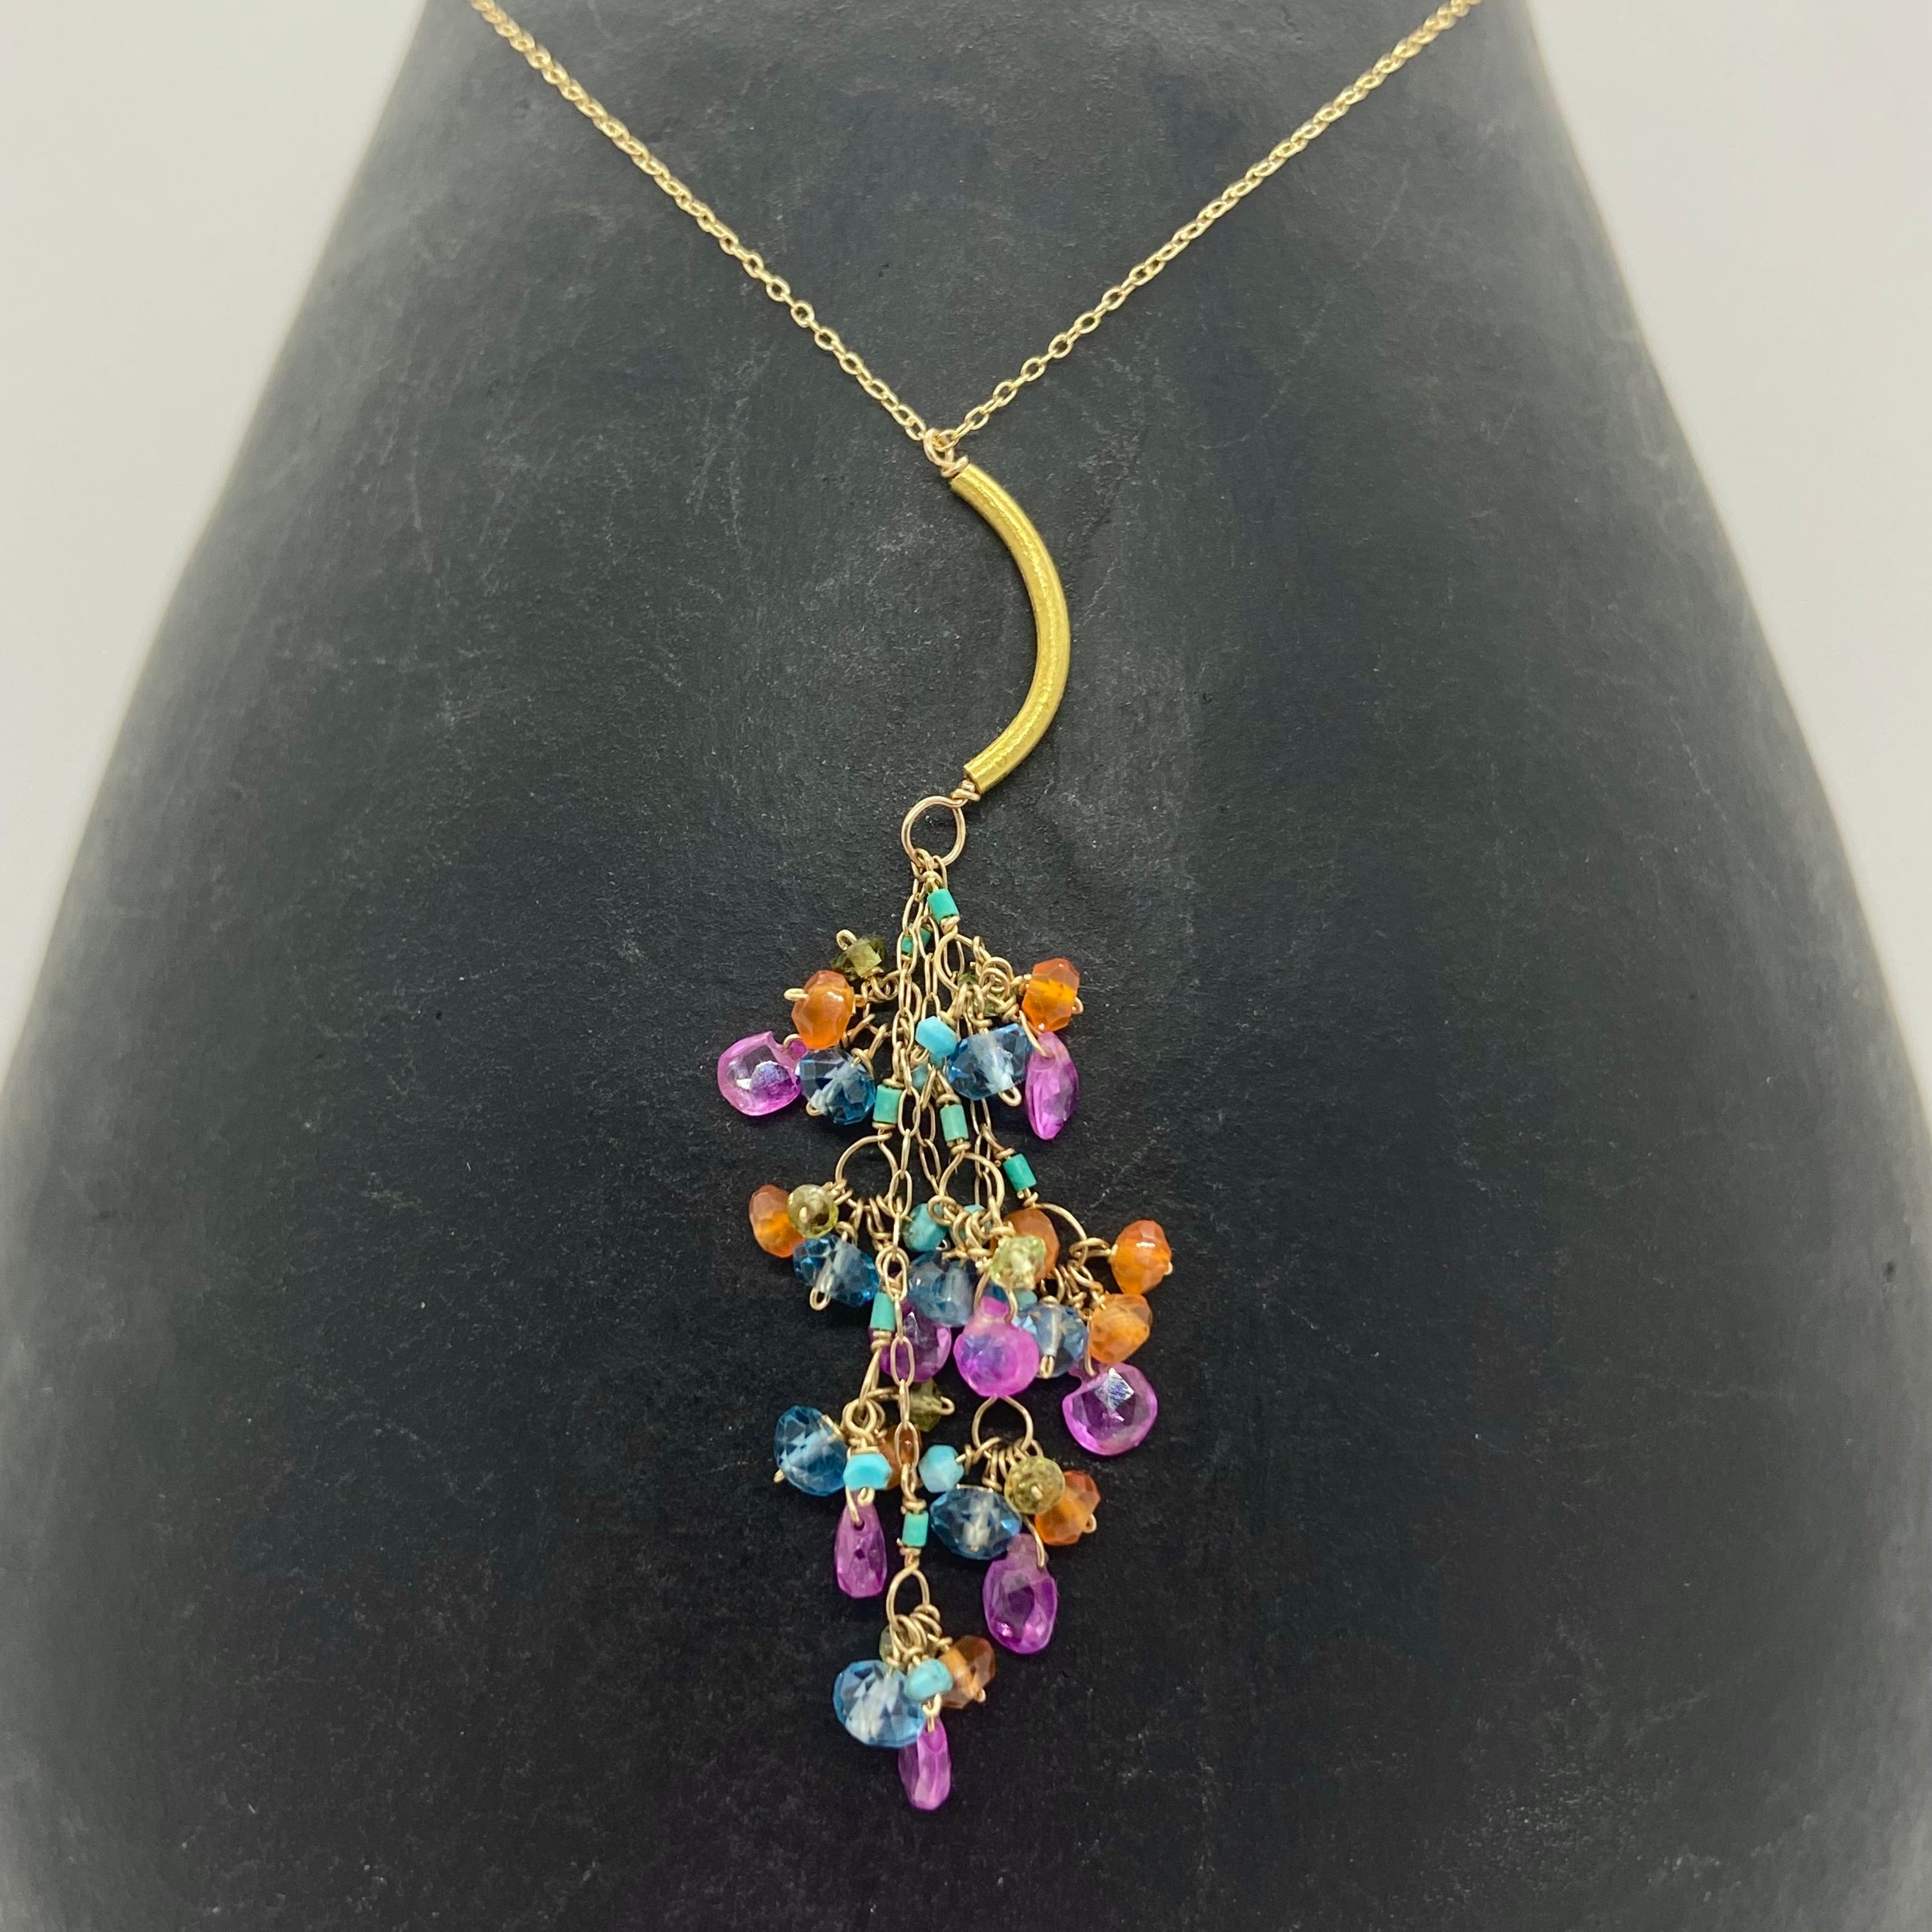 14k Gold Chain Necklace w/ 18k Gold Pendant, Pink Sapphires, Blue London Topaz, Carnelian, Afghan Turquoise & Grey Sapphires